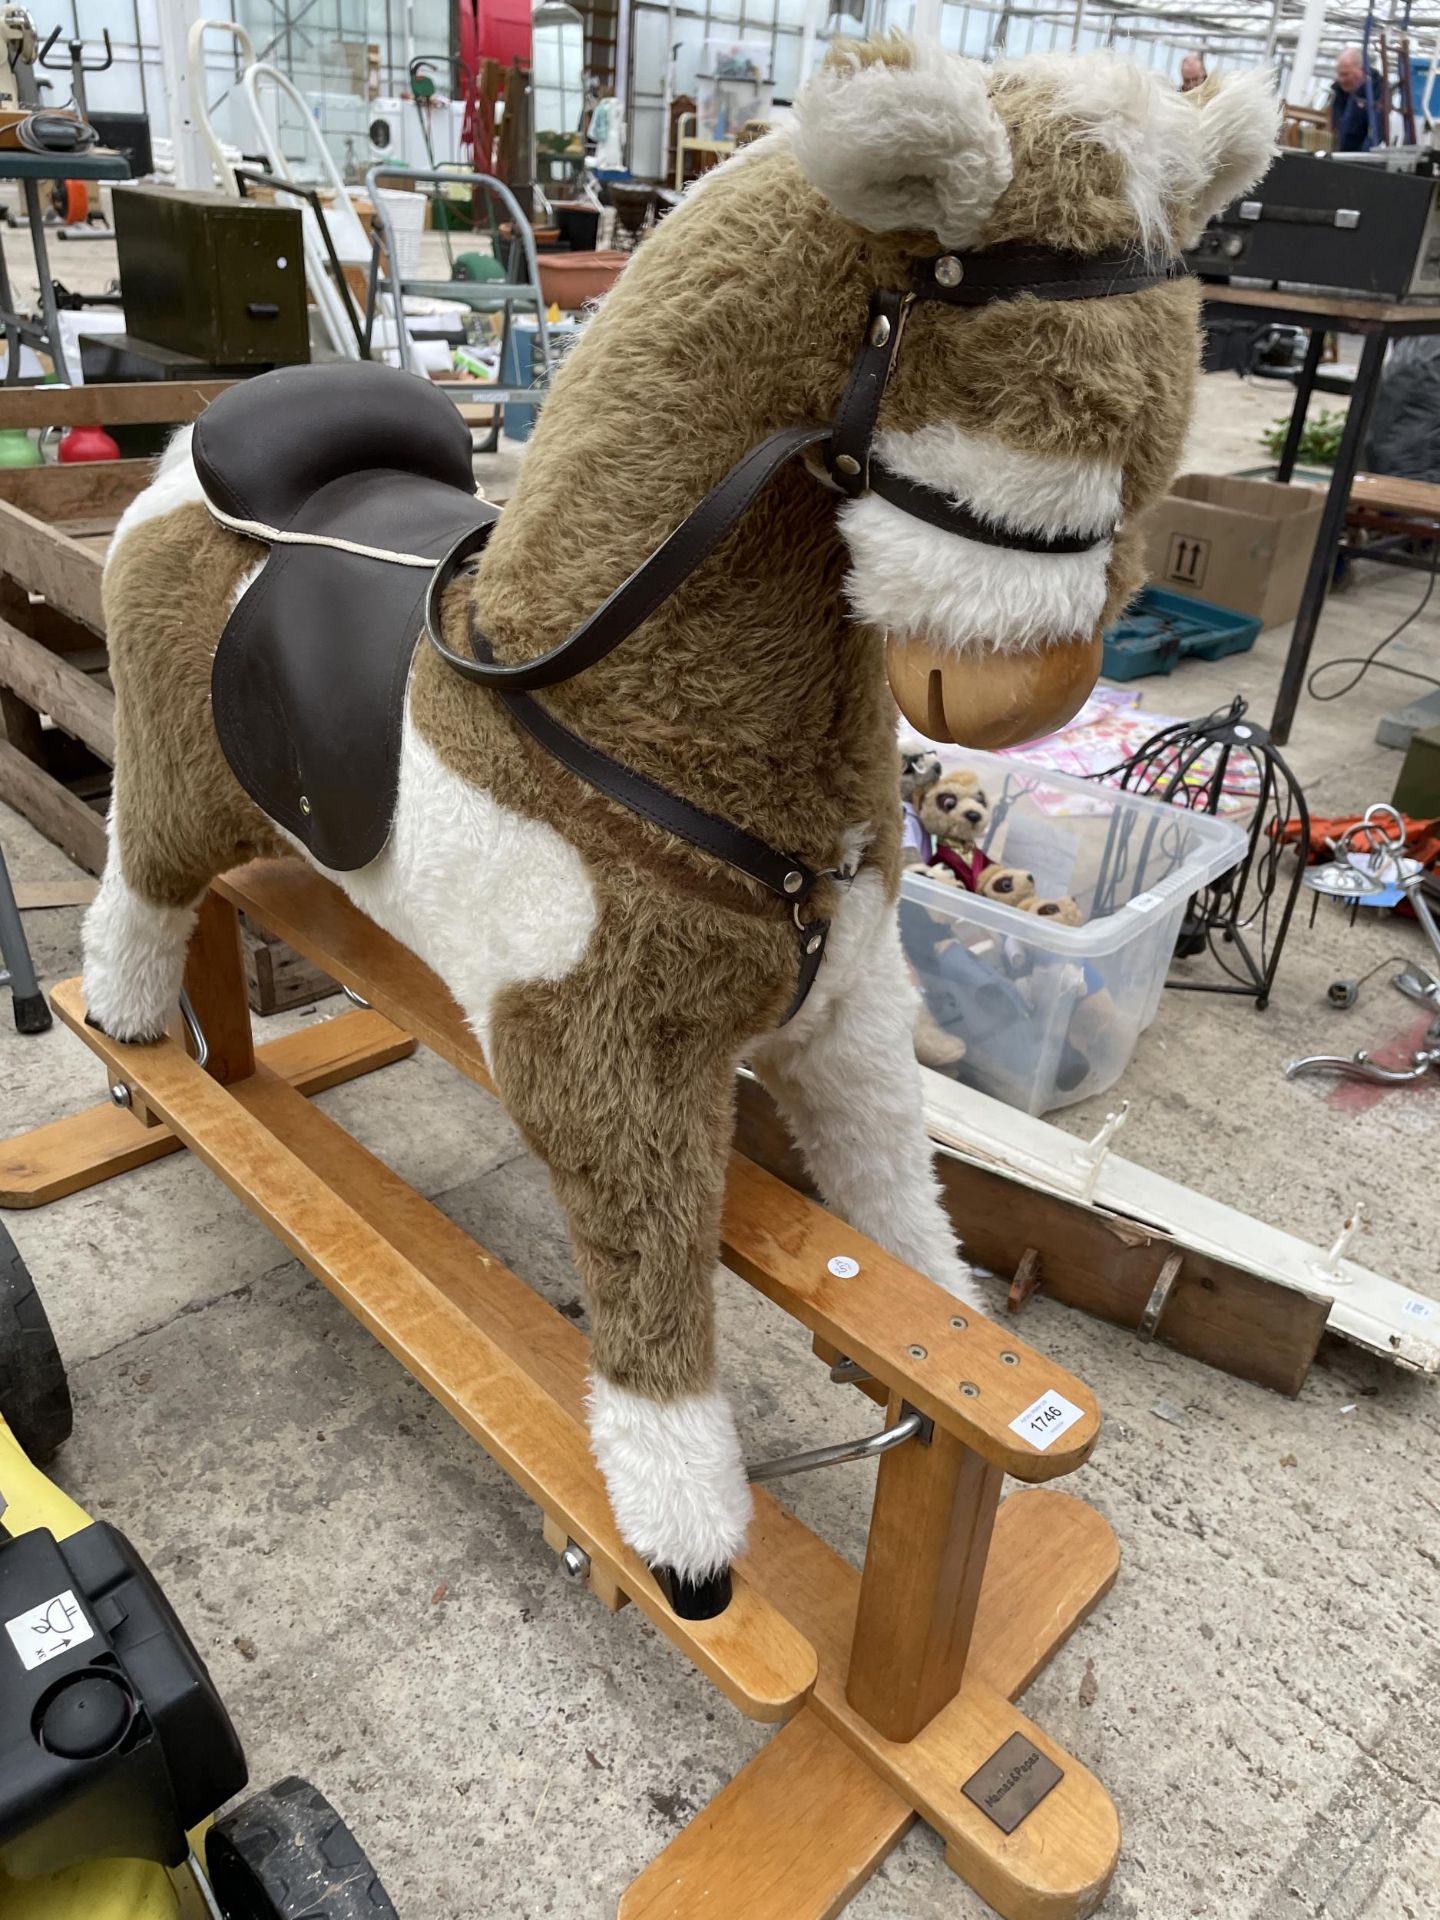 A MAMAS AND PAPAS PLUSH CHILDS ROCKING HORSE - Image 3 of 3